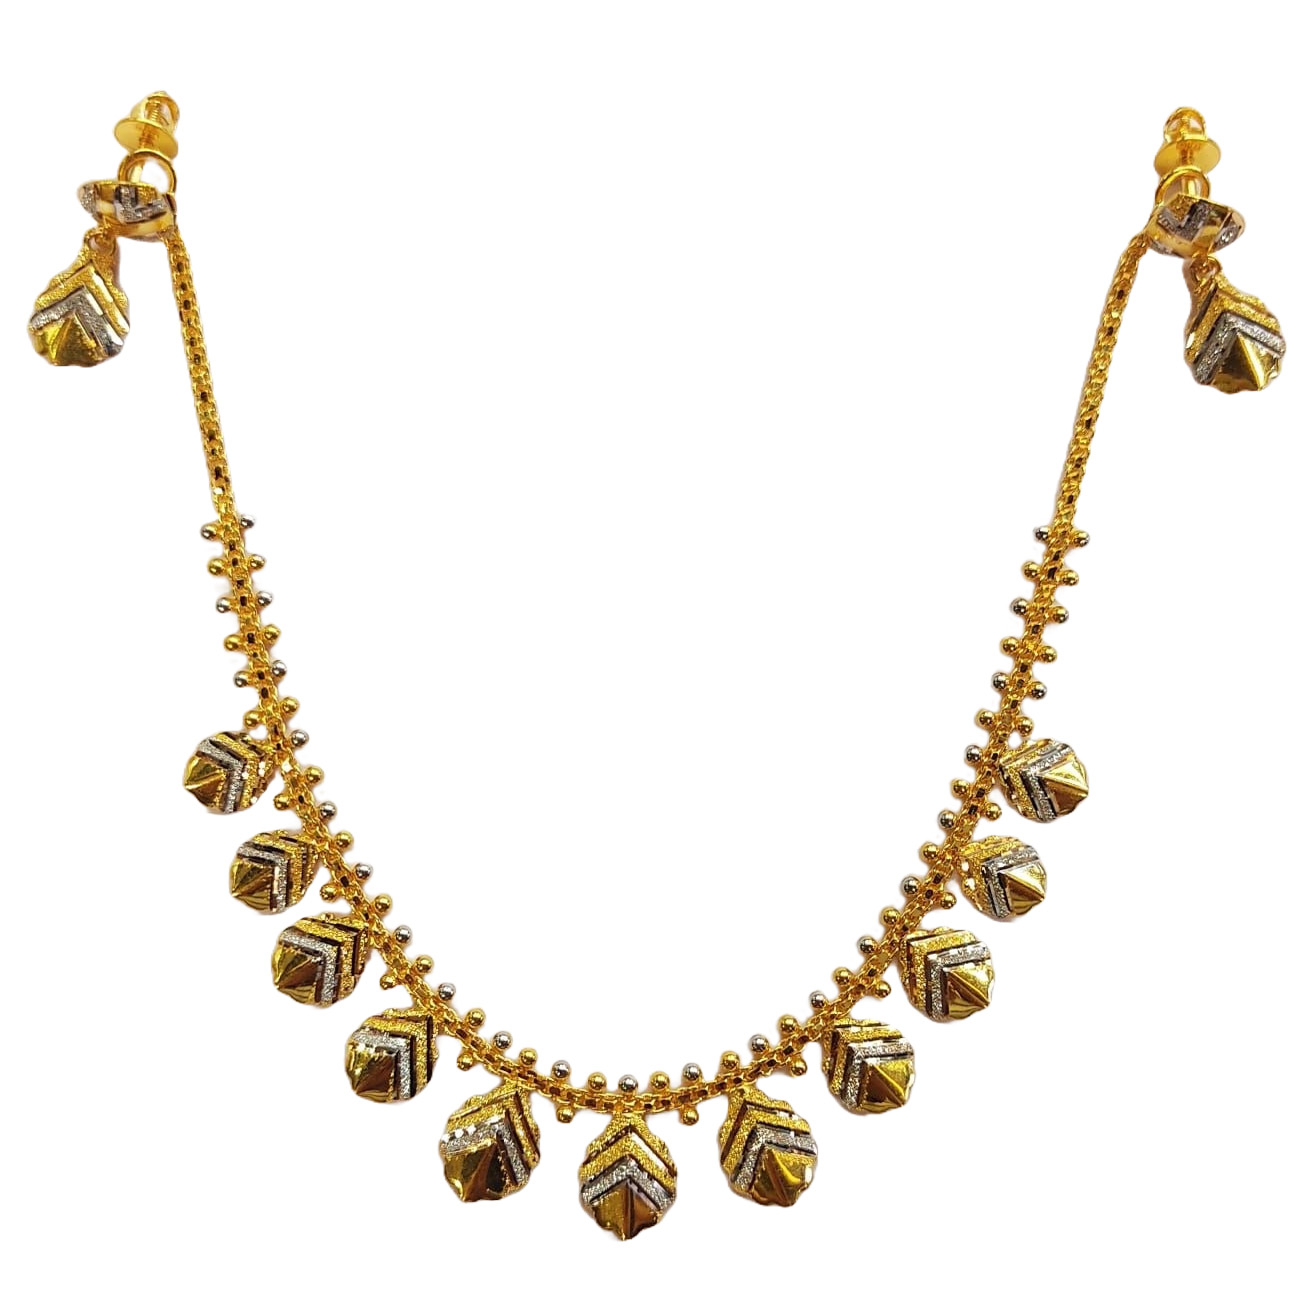 Buy quality Rose light weight gold necklace in Patan